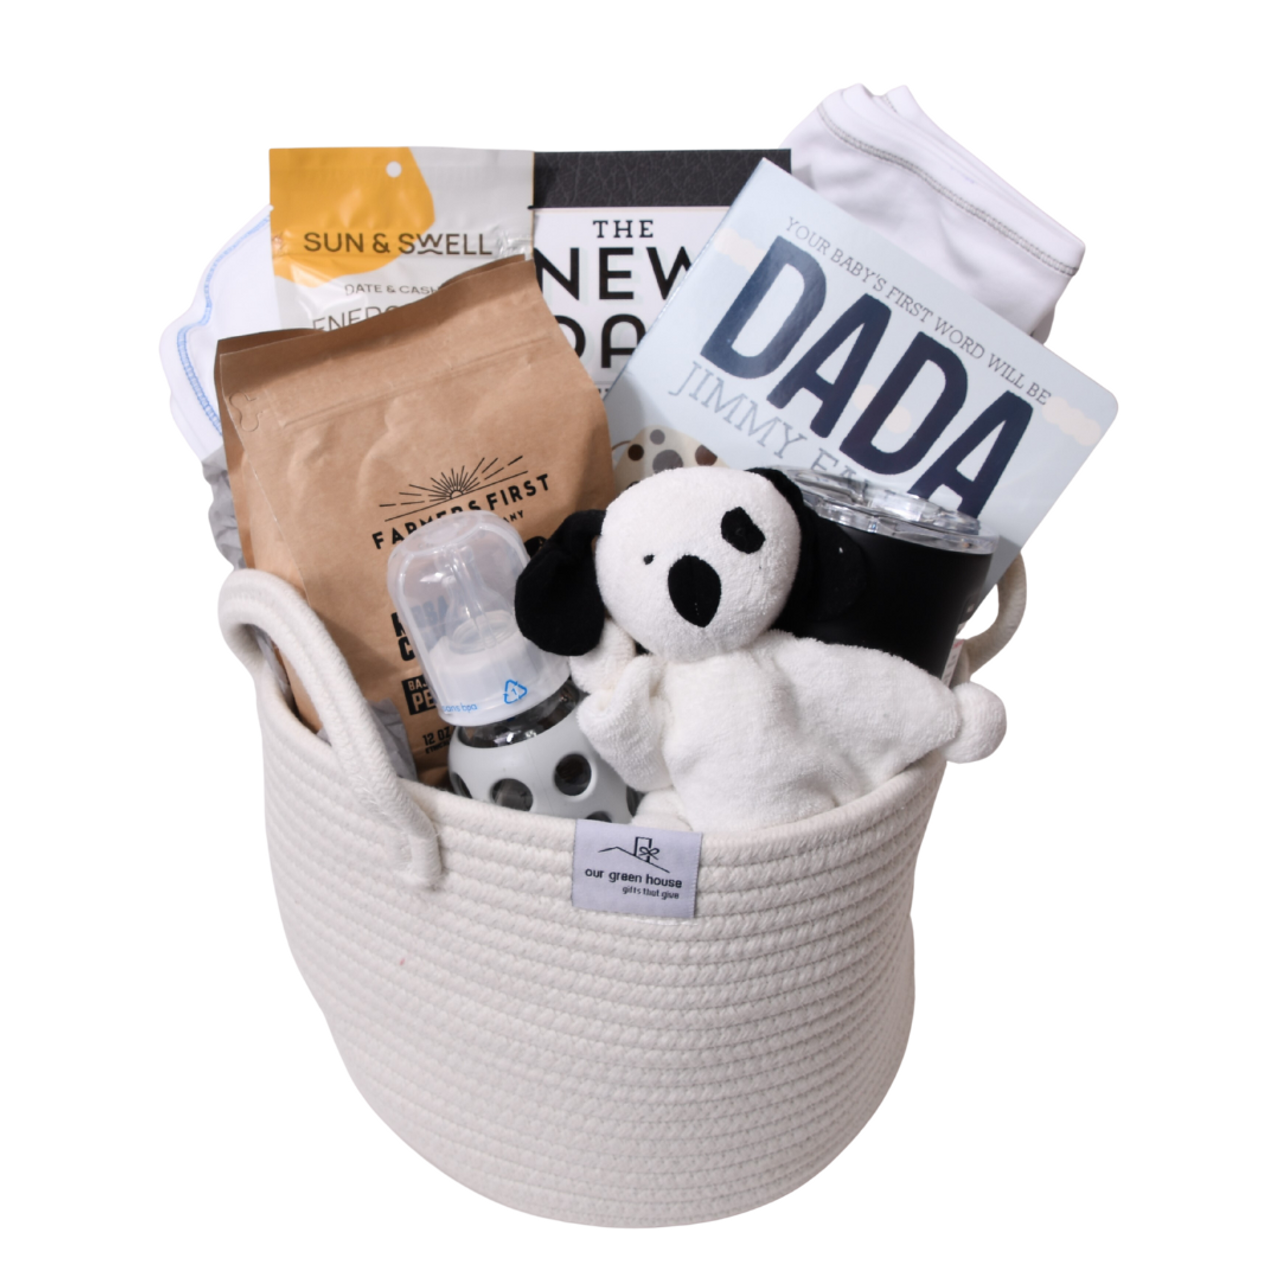 New Dad Gift Basket - Dad to Be | Our Green House